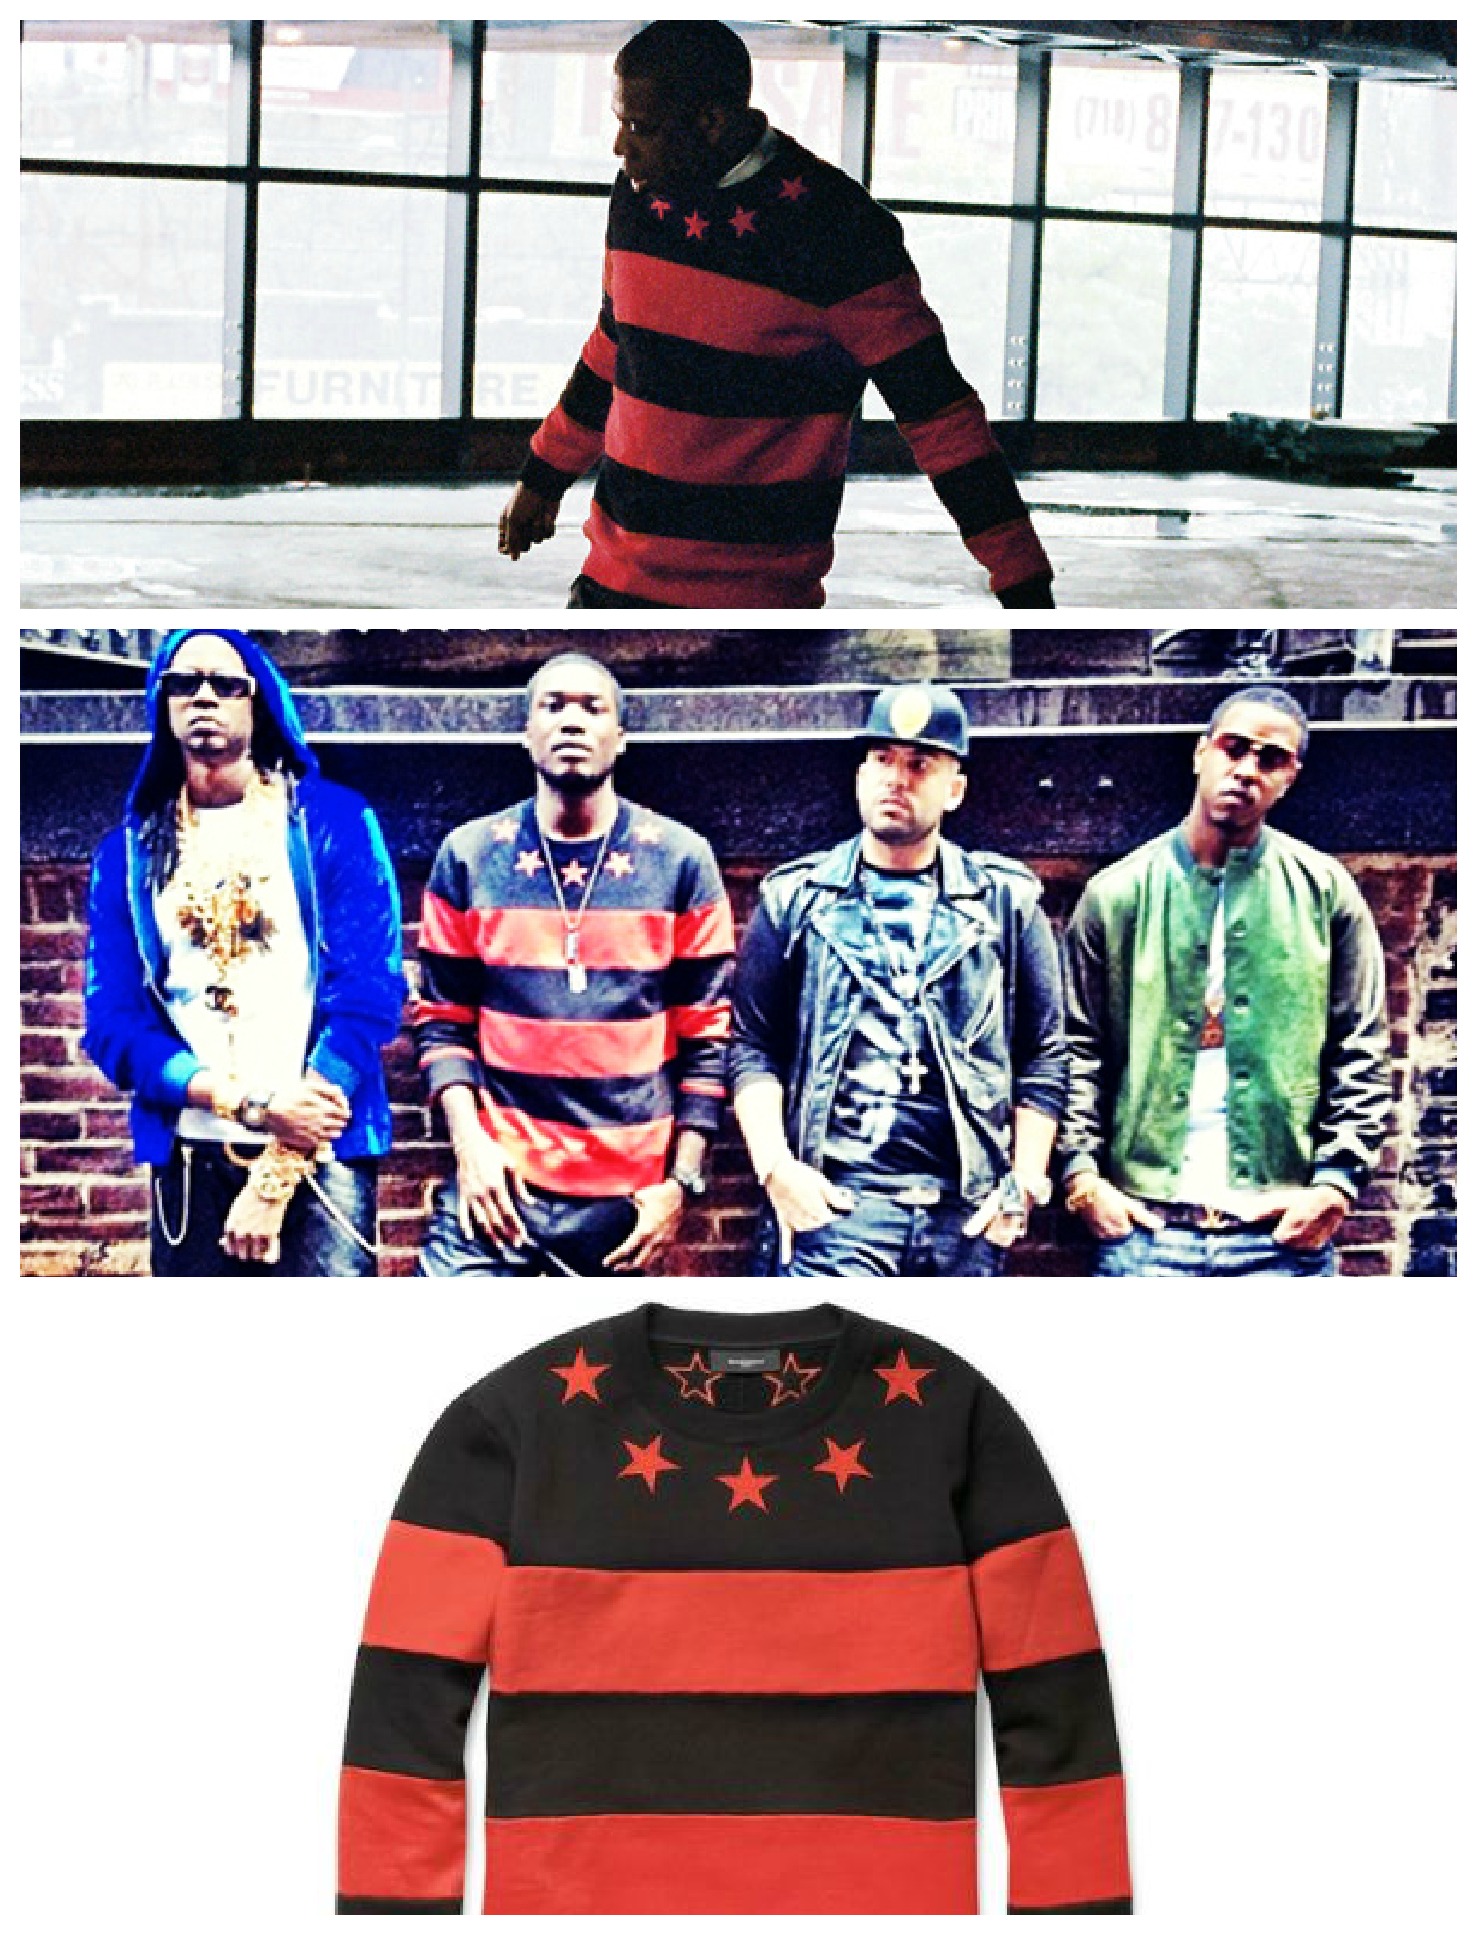 jay-z-meek-mill-givenchy-striped-star-sweater-beauty-and-the-beat-blog